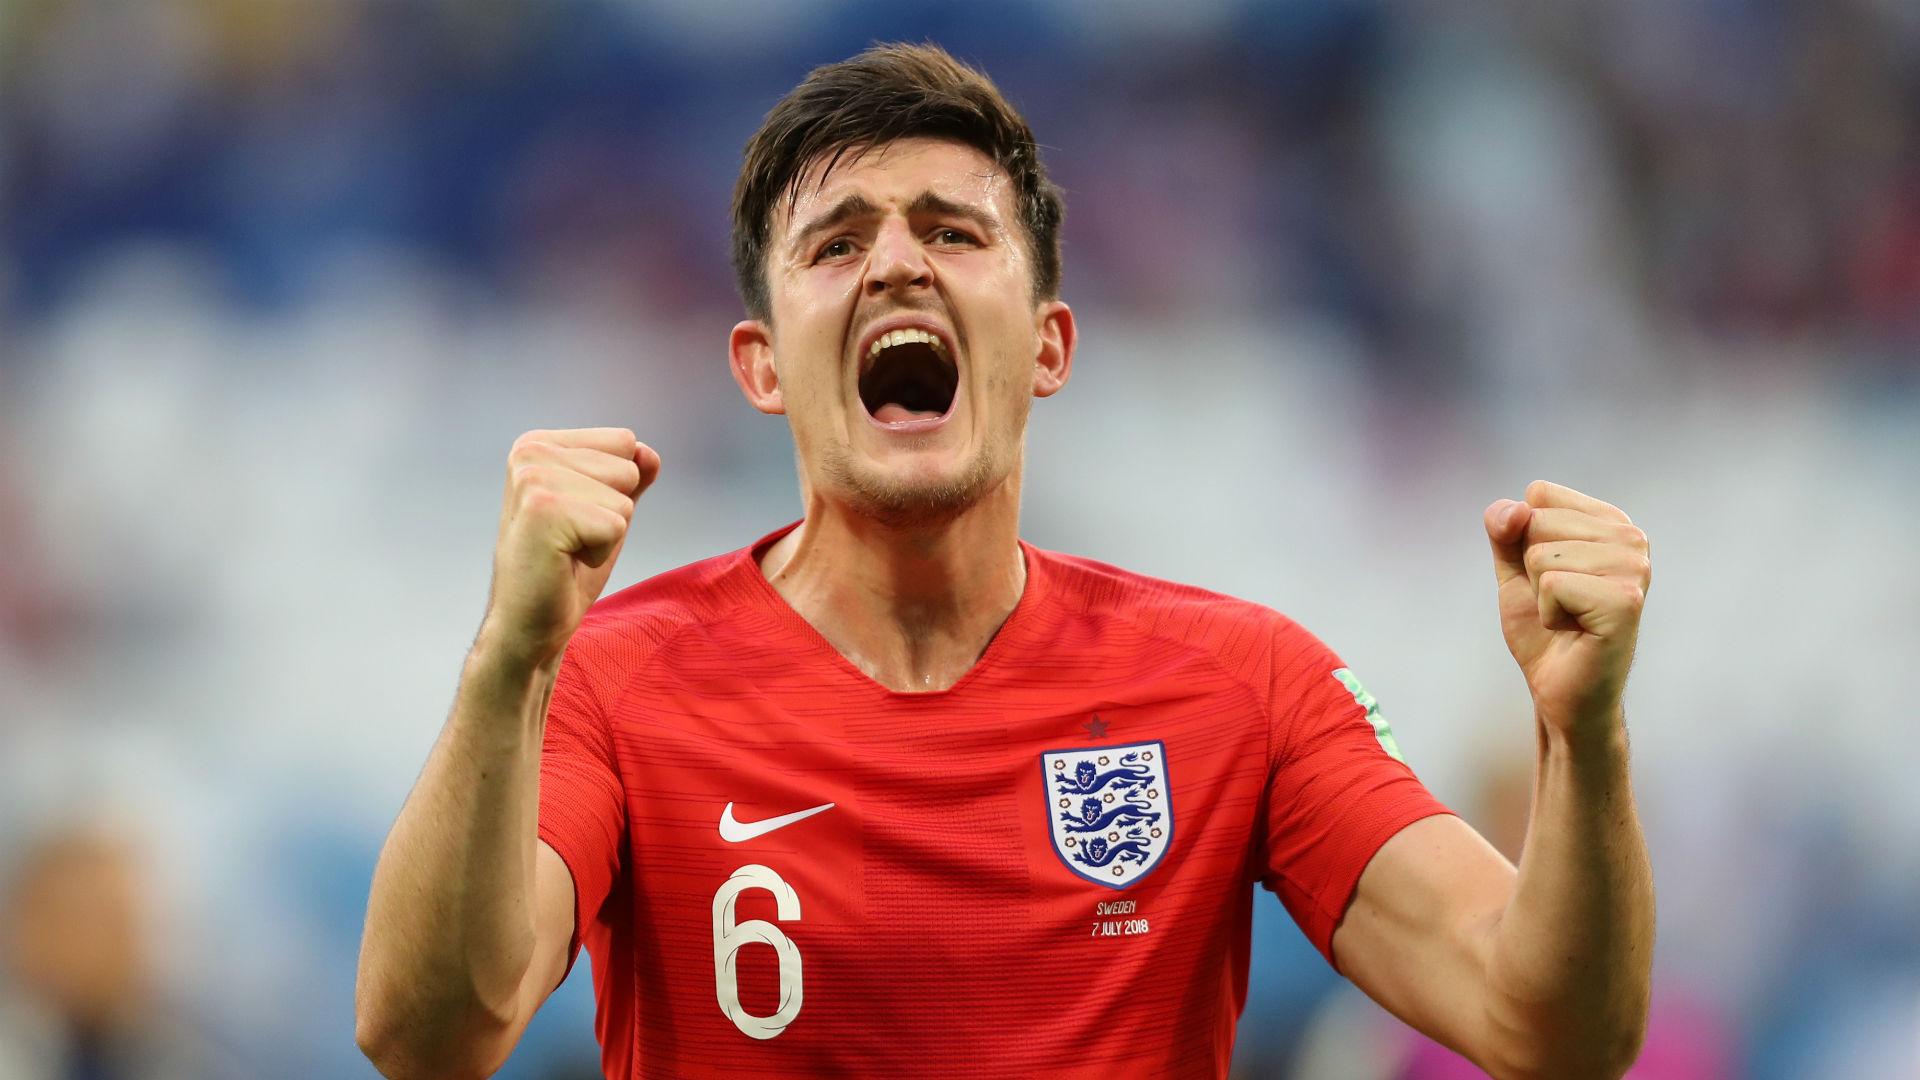 Manchester United transfer news: Maguire: I didn't want to leave